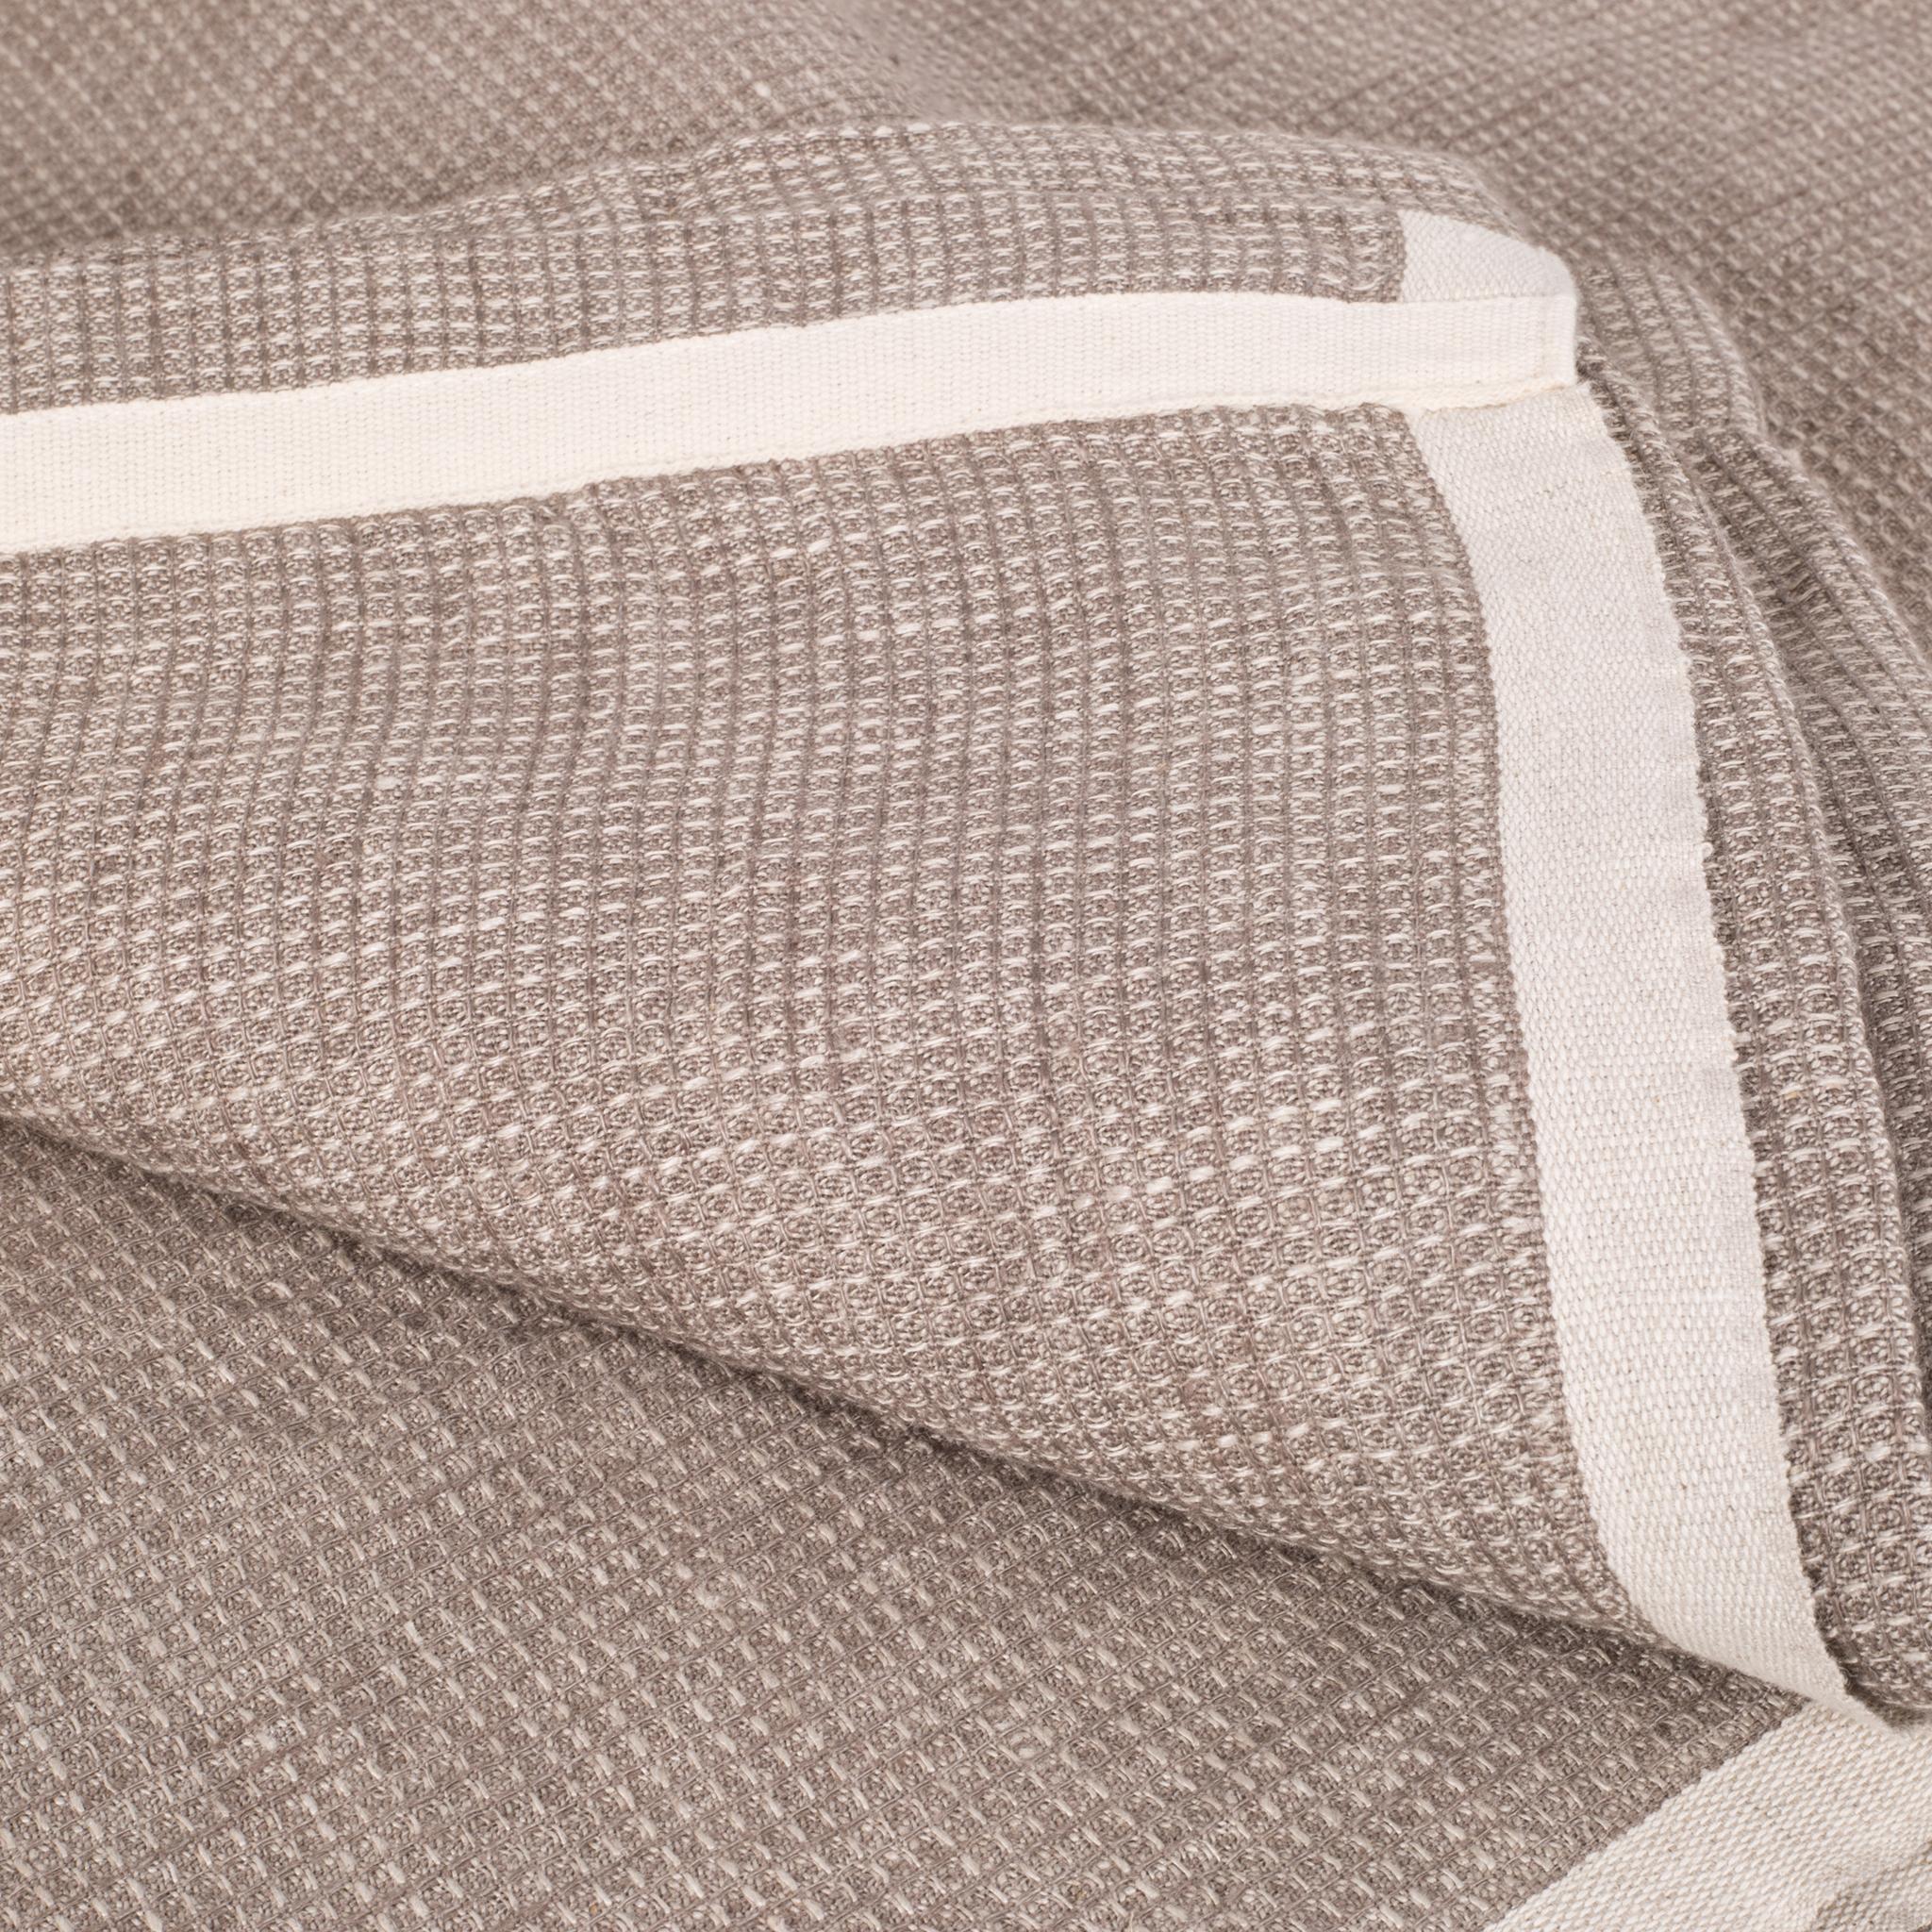 About

Not just for your bed, these linen blankets will be perfect for use in your living room, on picnics, and at the beach. Inspired by antique linen, the subtle waffle texture feels is light and comforting against the skin. 

Creator: Fog